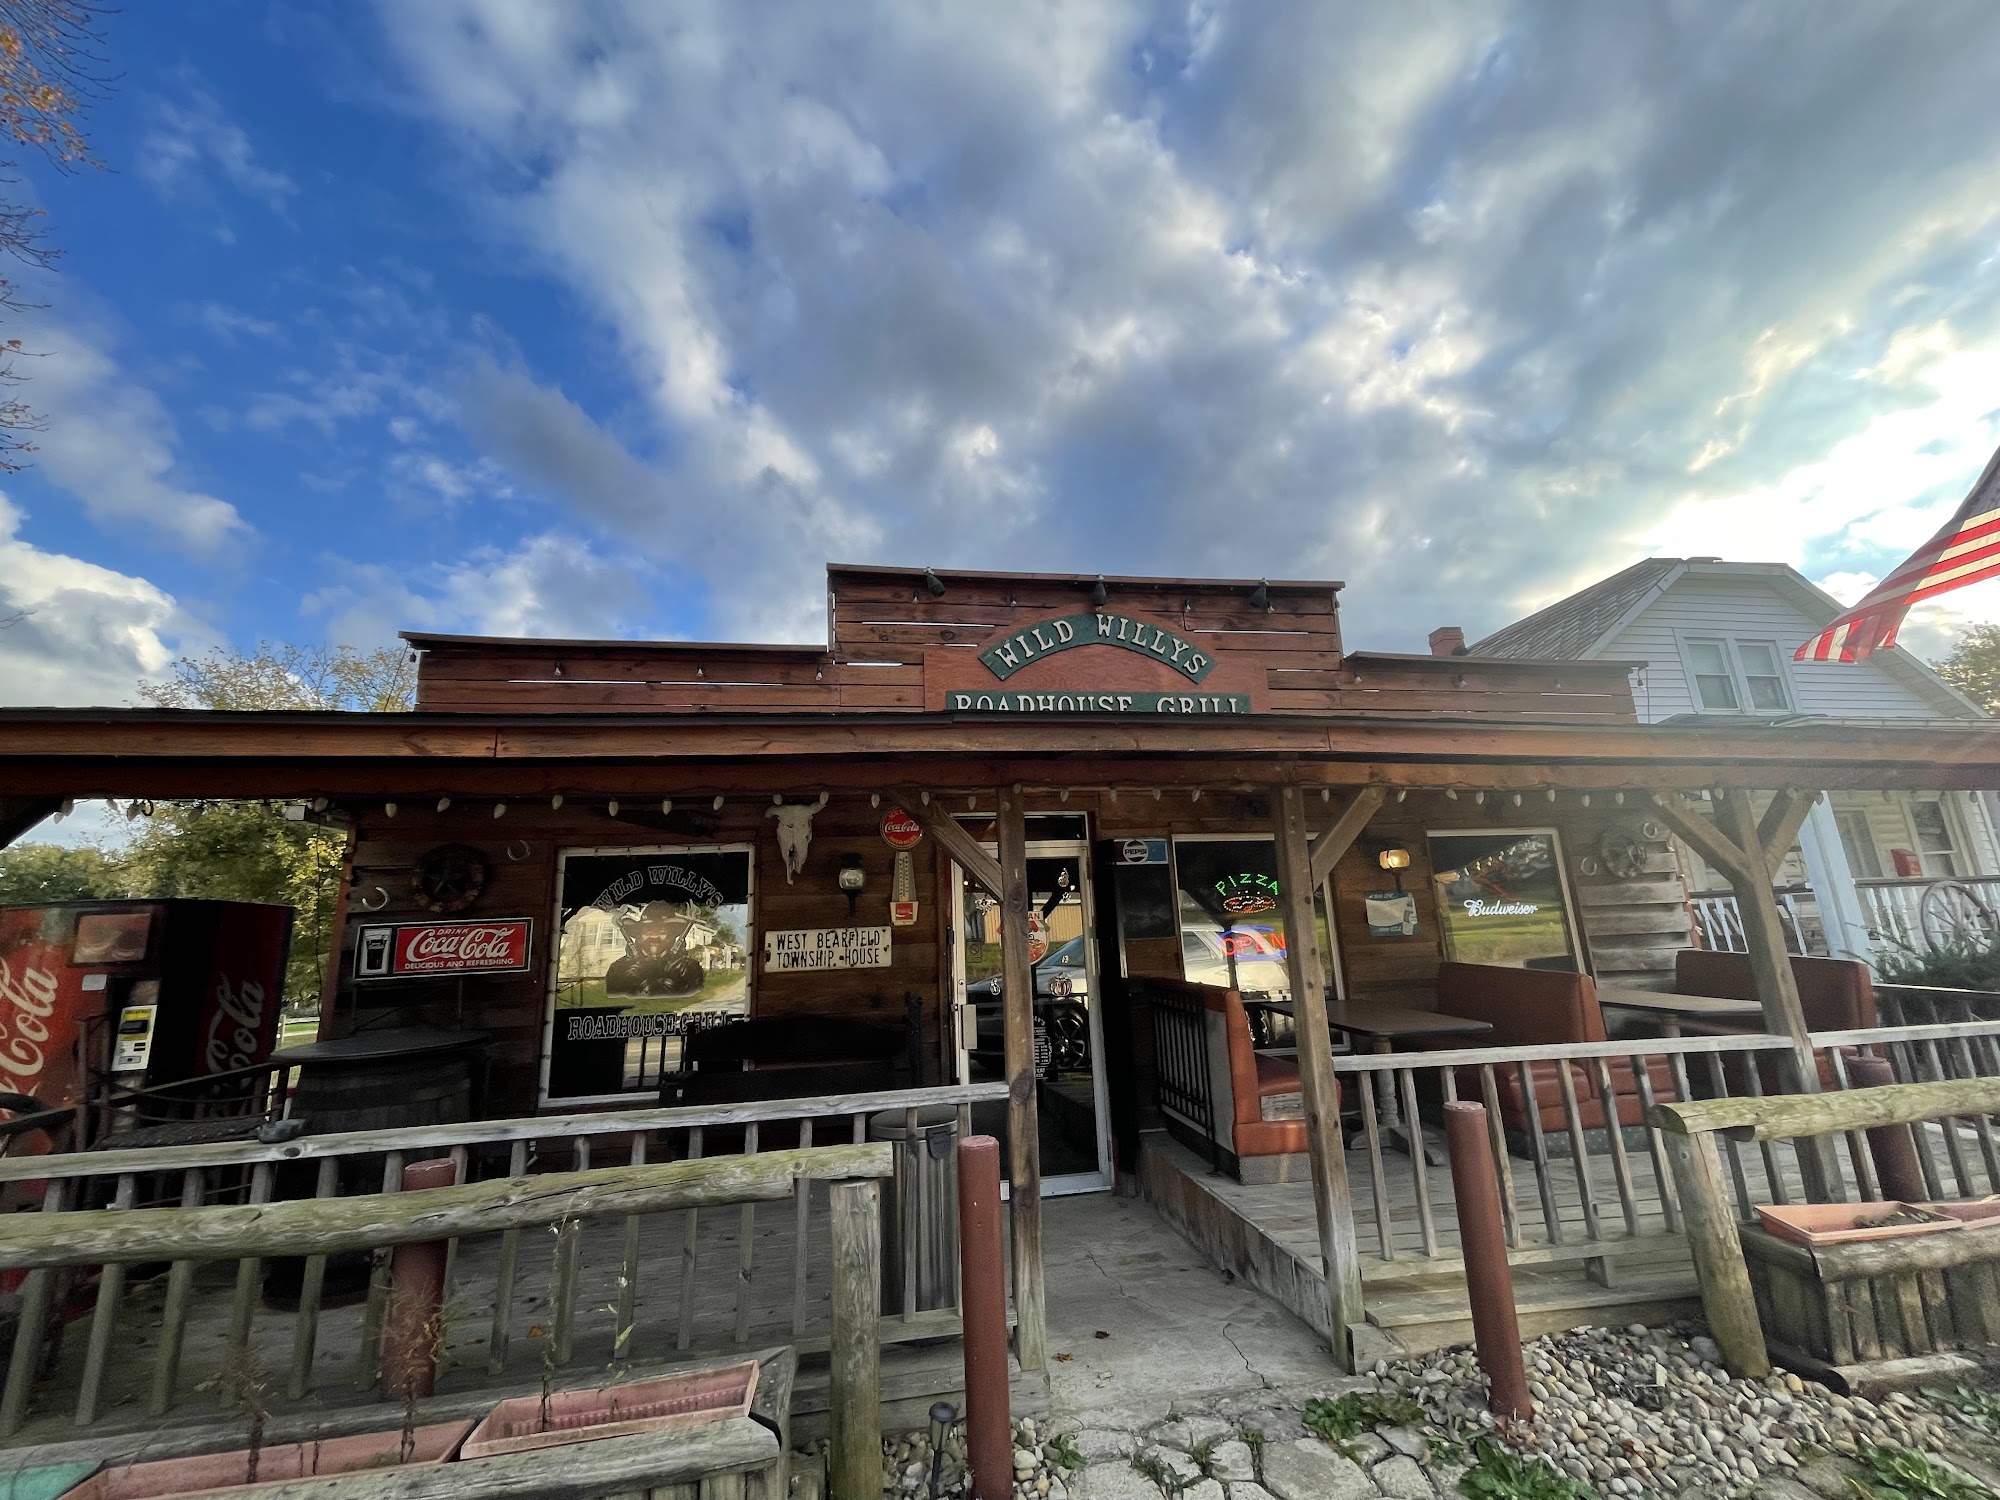 Wild Willy's Roadhouse Grill